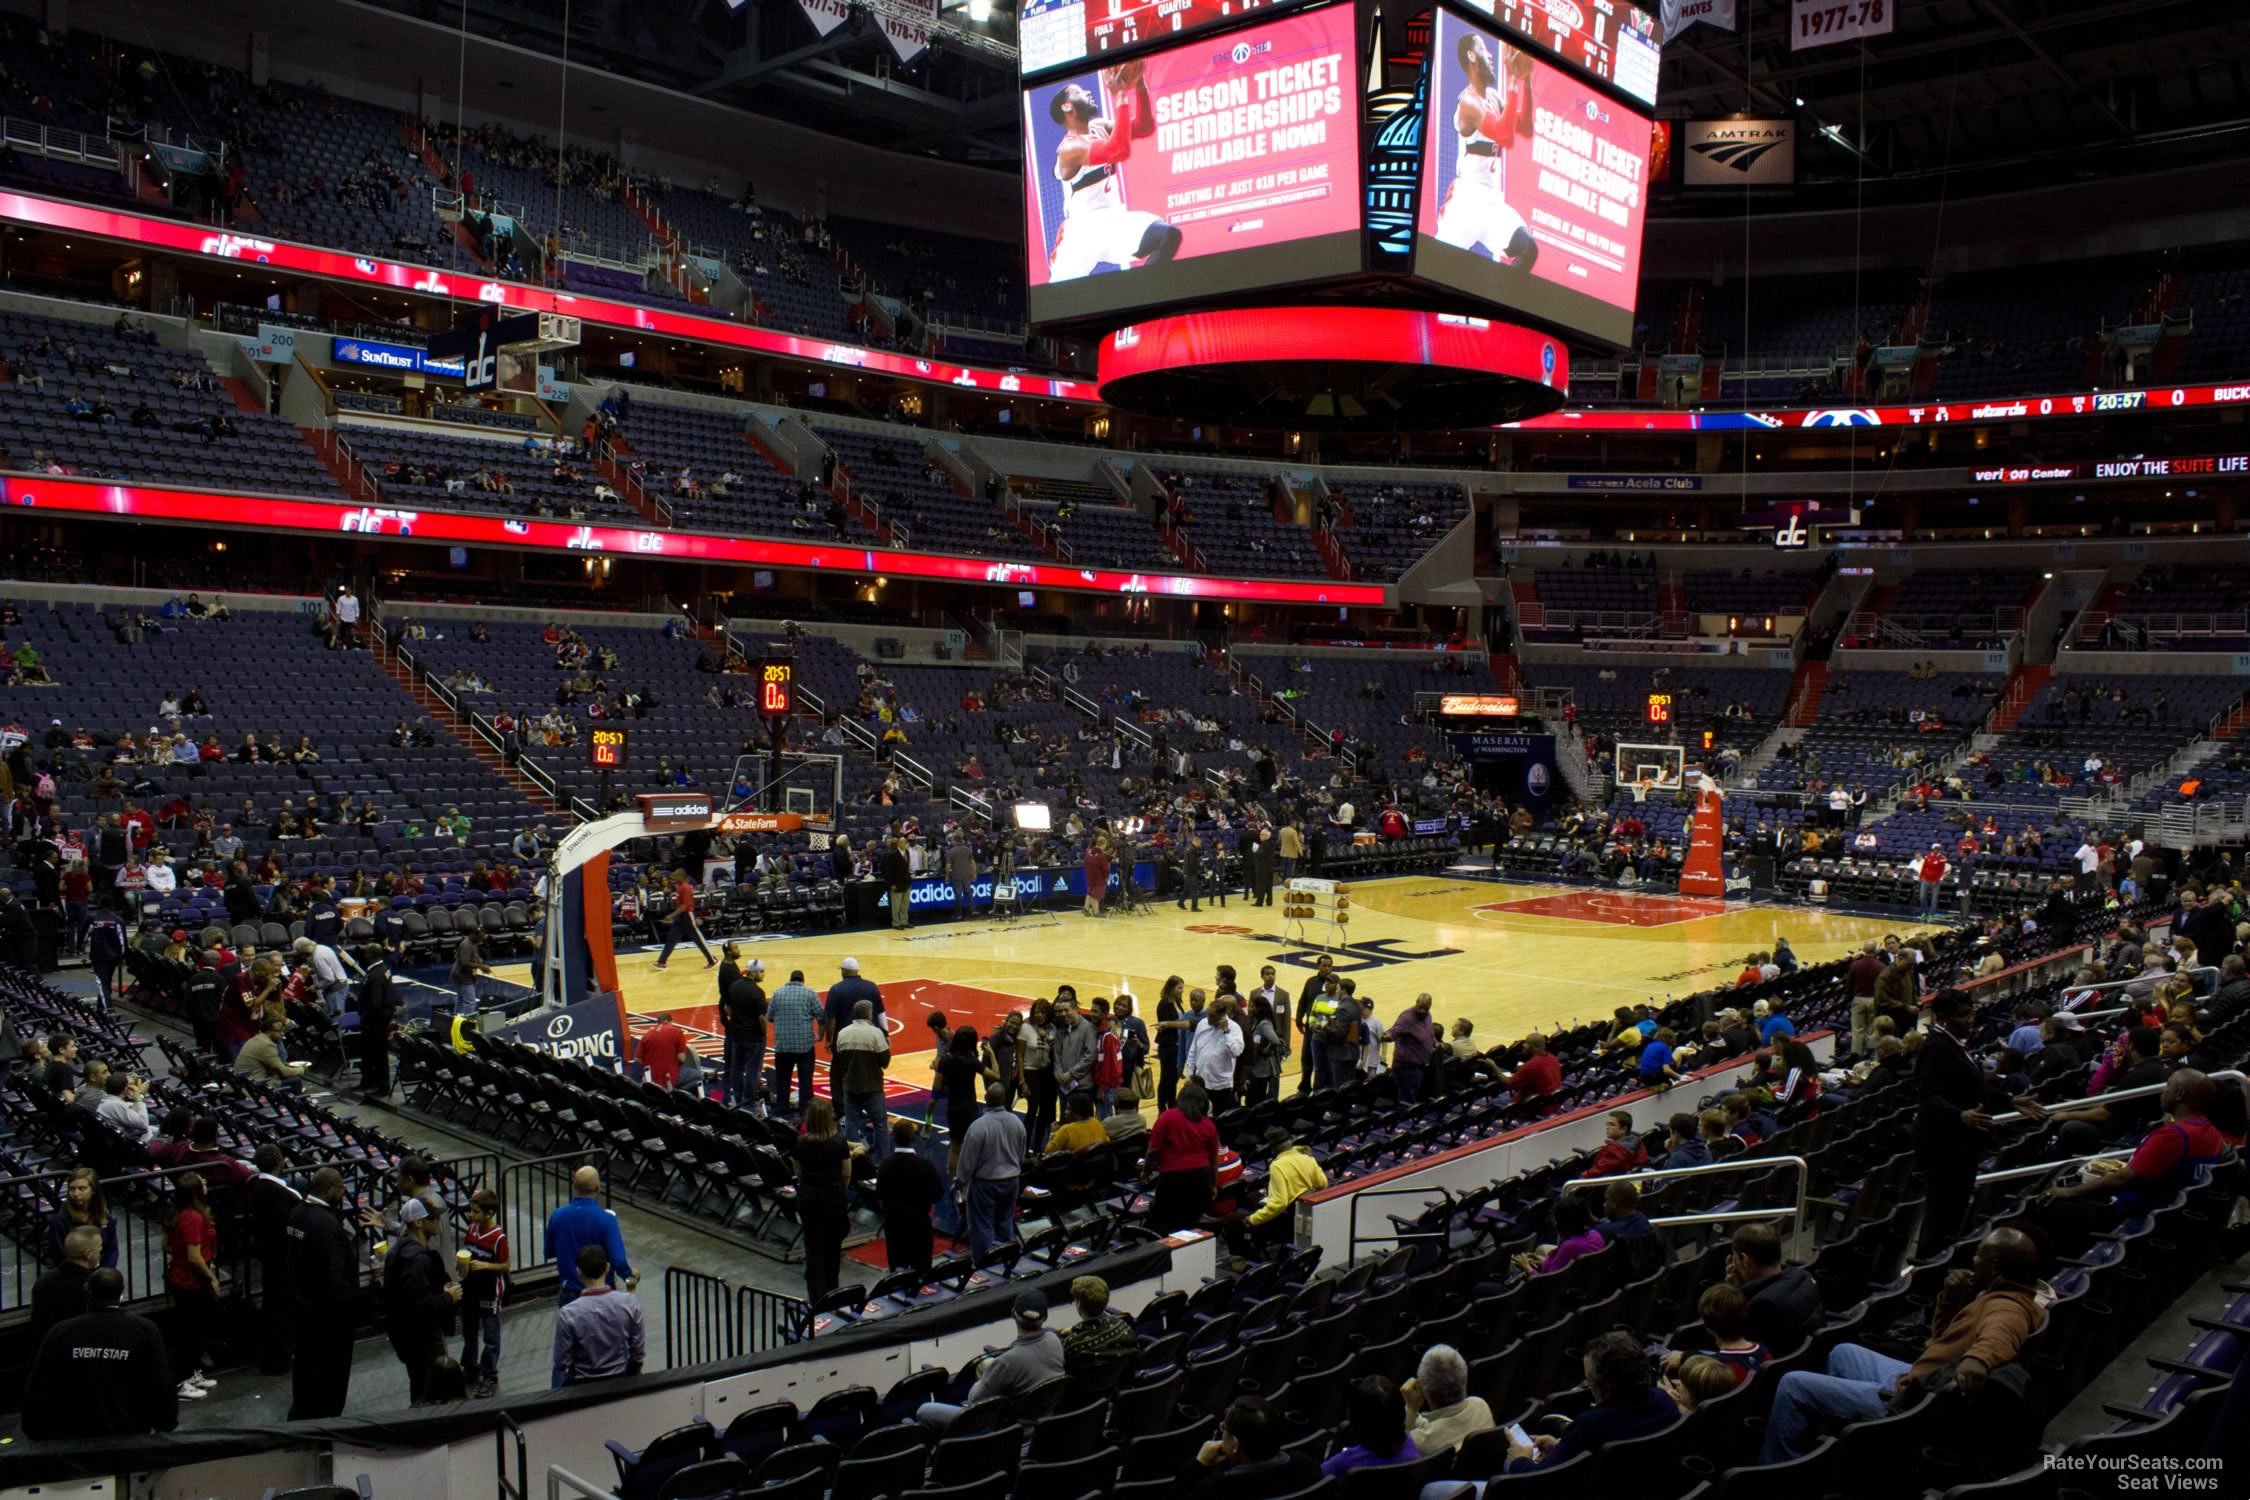 section 108, row n seat view  for basketball - capital one arena